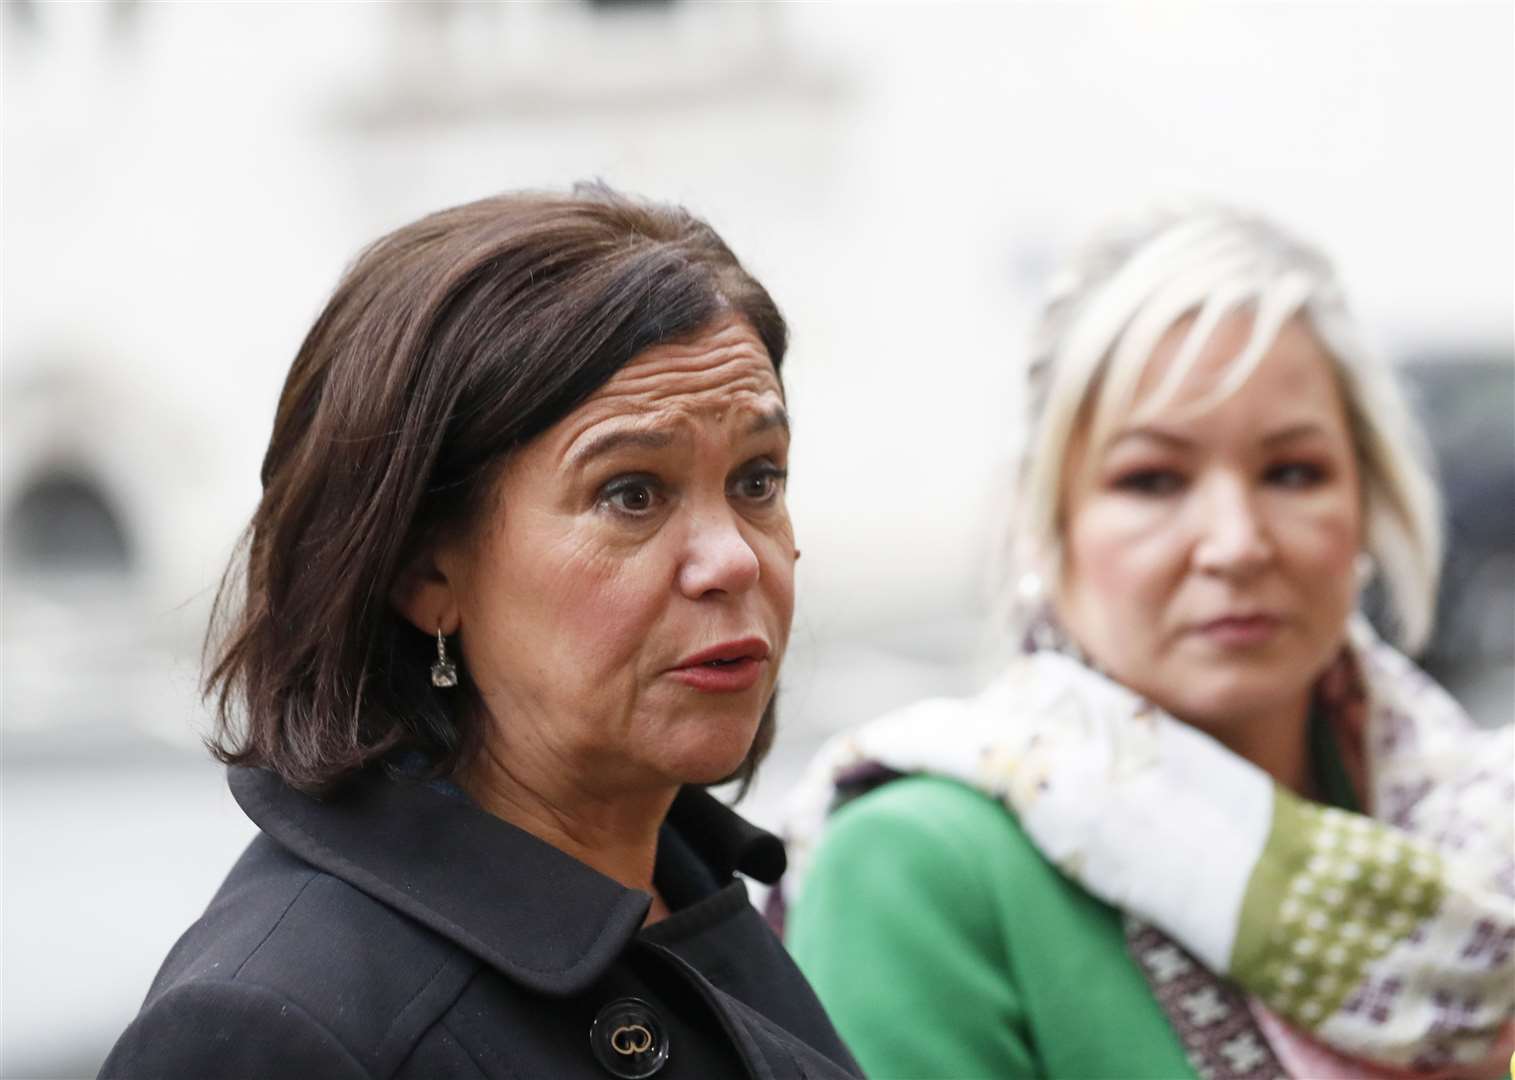 Sinn Fein Party leader Mary Lou McDonald, left, with Sinn Fein vice president Michelle O’Neill in Belfast after she said she was excluded from political talks (Peter Morrison/PA)